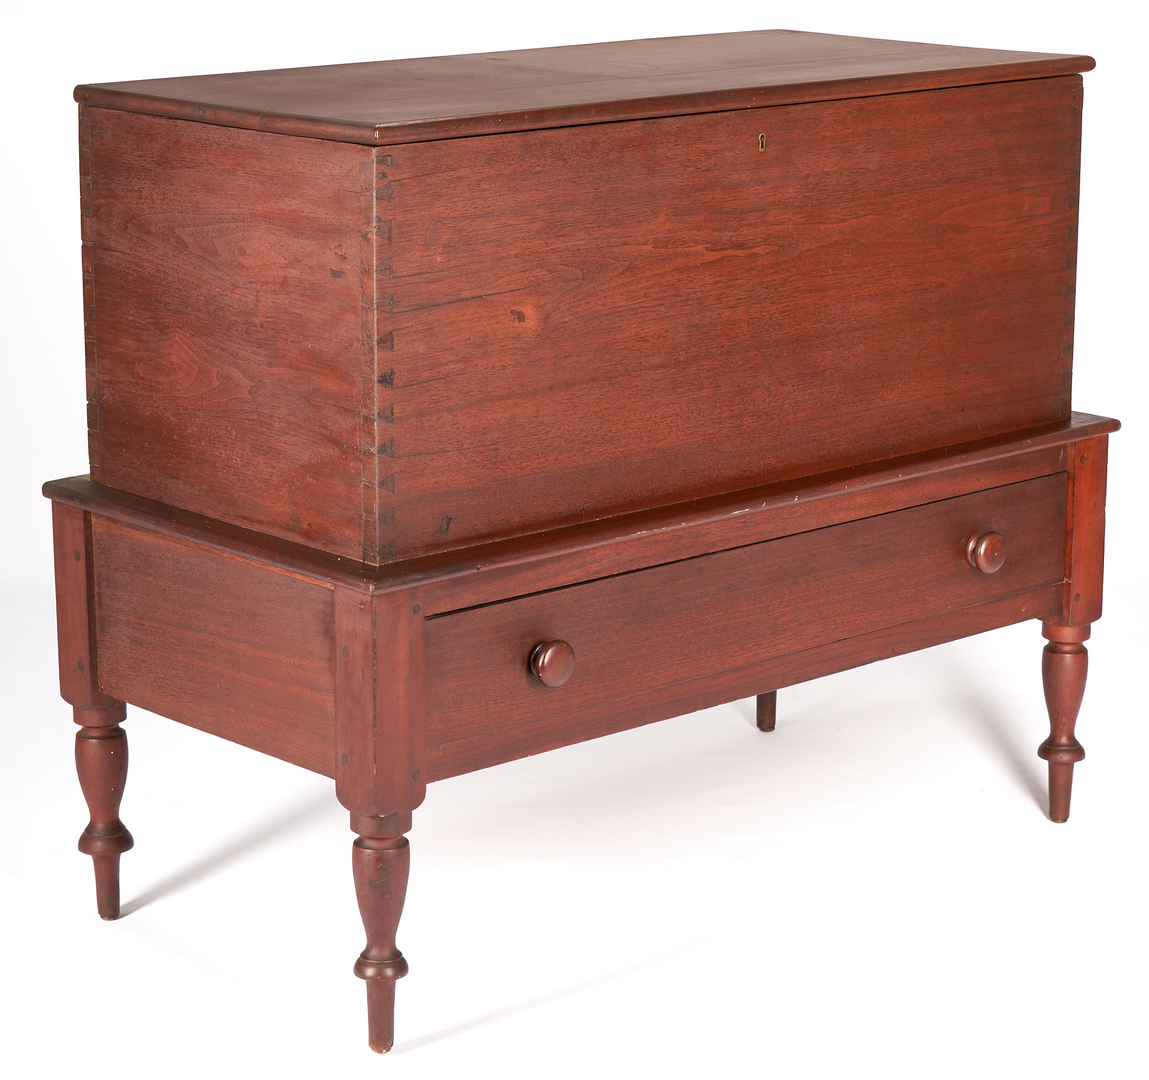 Lot 125: Southern Walnut Blanket Chest on Stand, possibly Kentucky